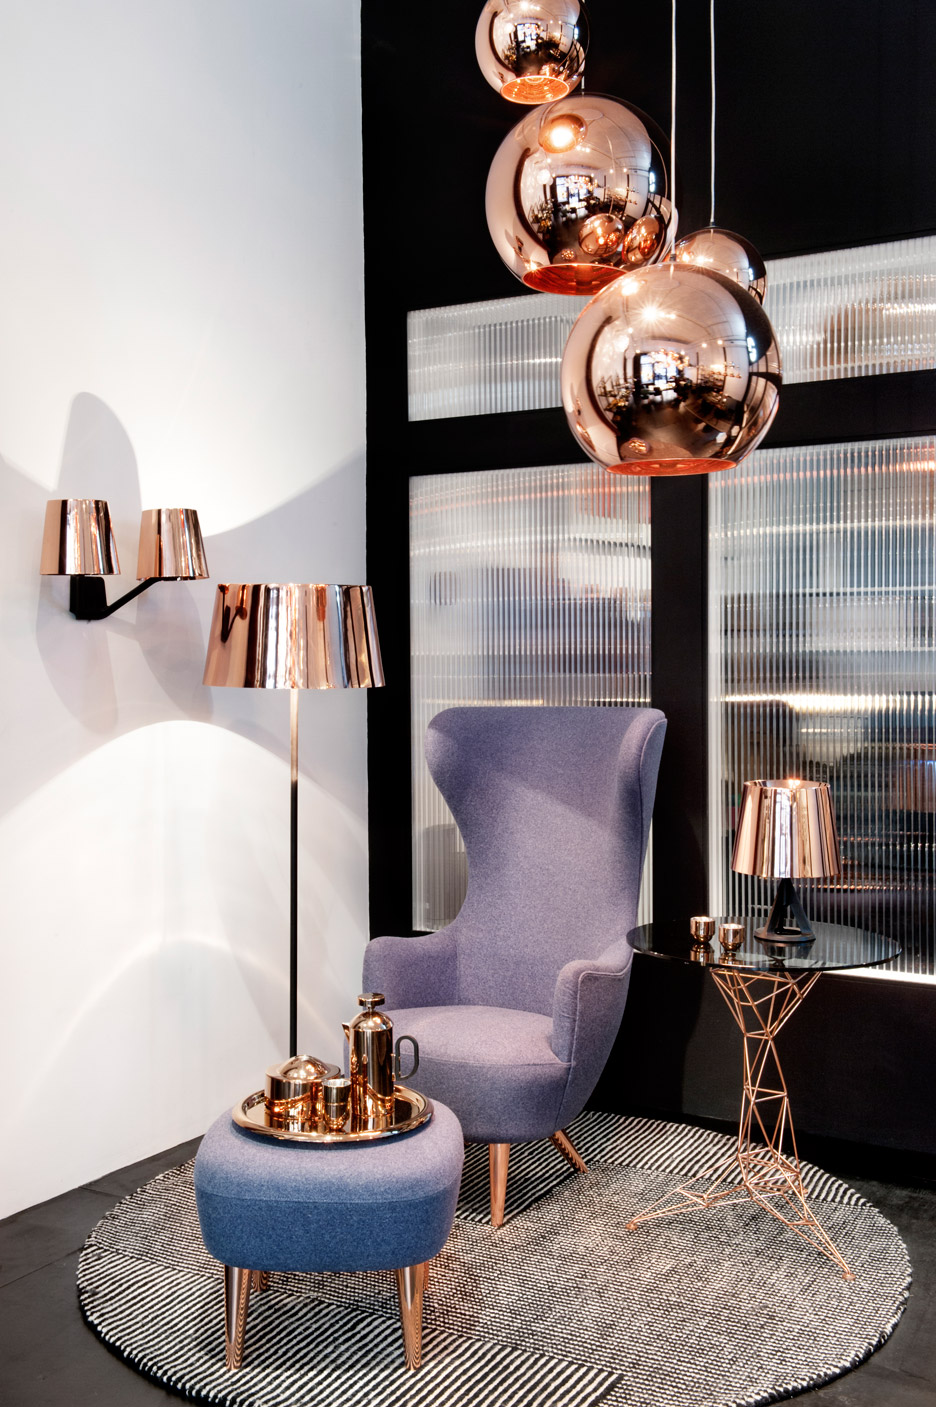 Tom Dixon's Manhattan showroom is his first outside London